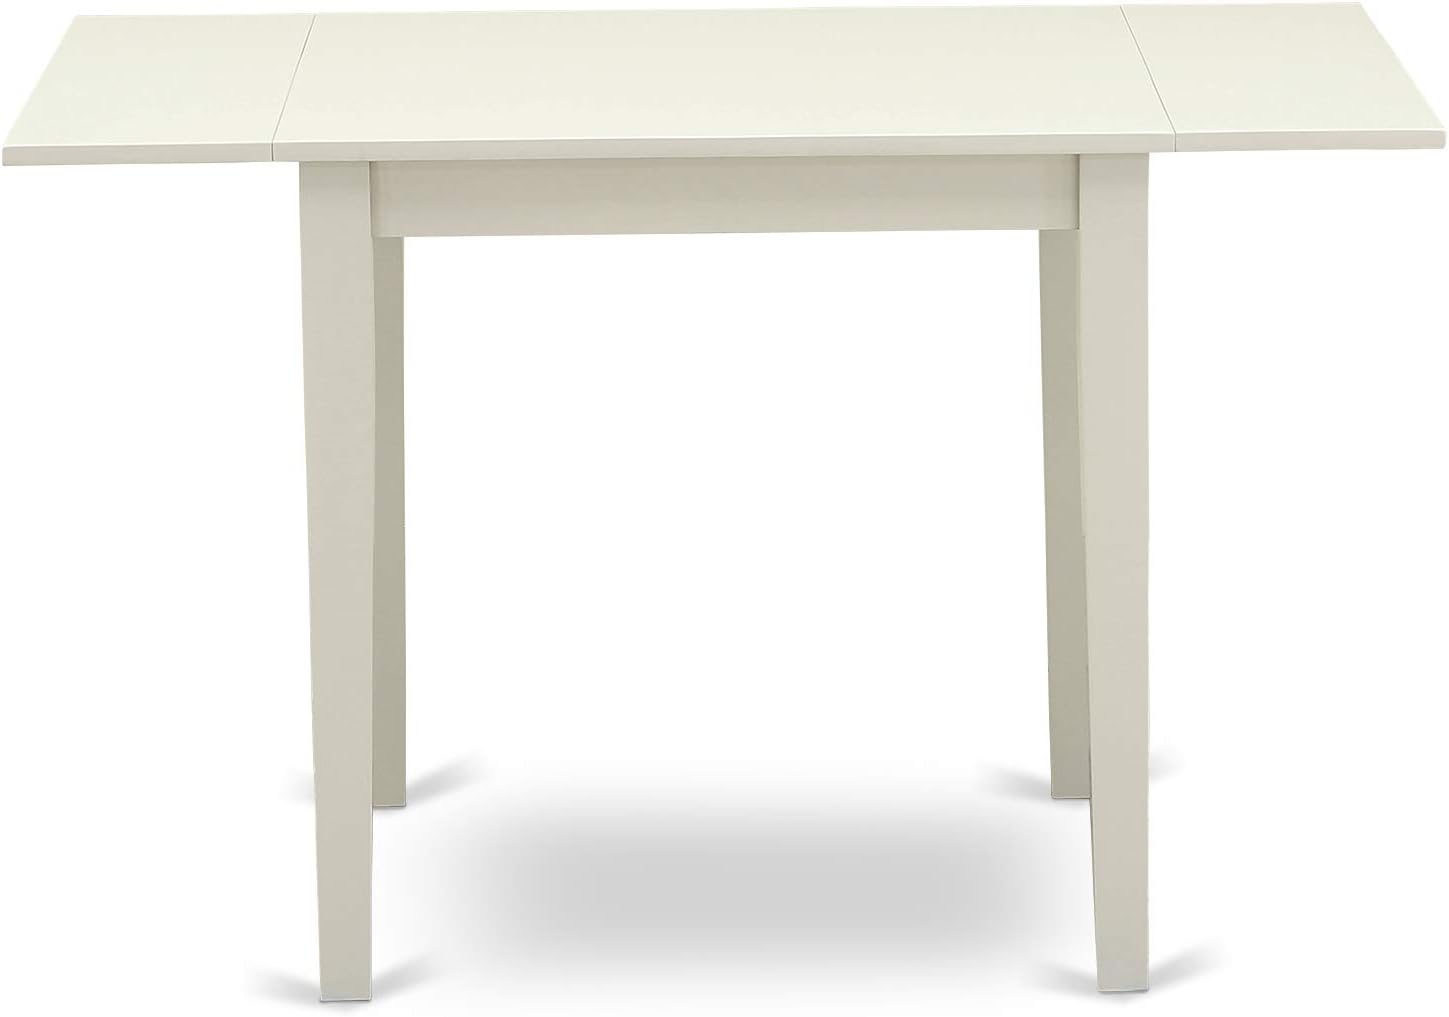 Norden Linen White Rectangular 48" Dining Table with Drop leaves